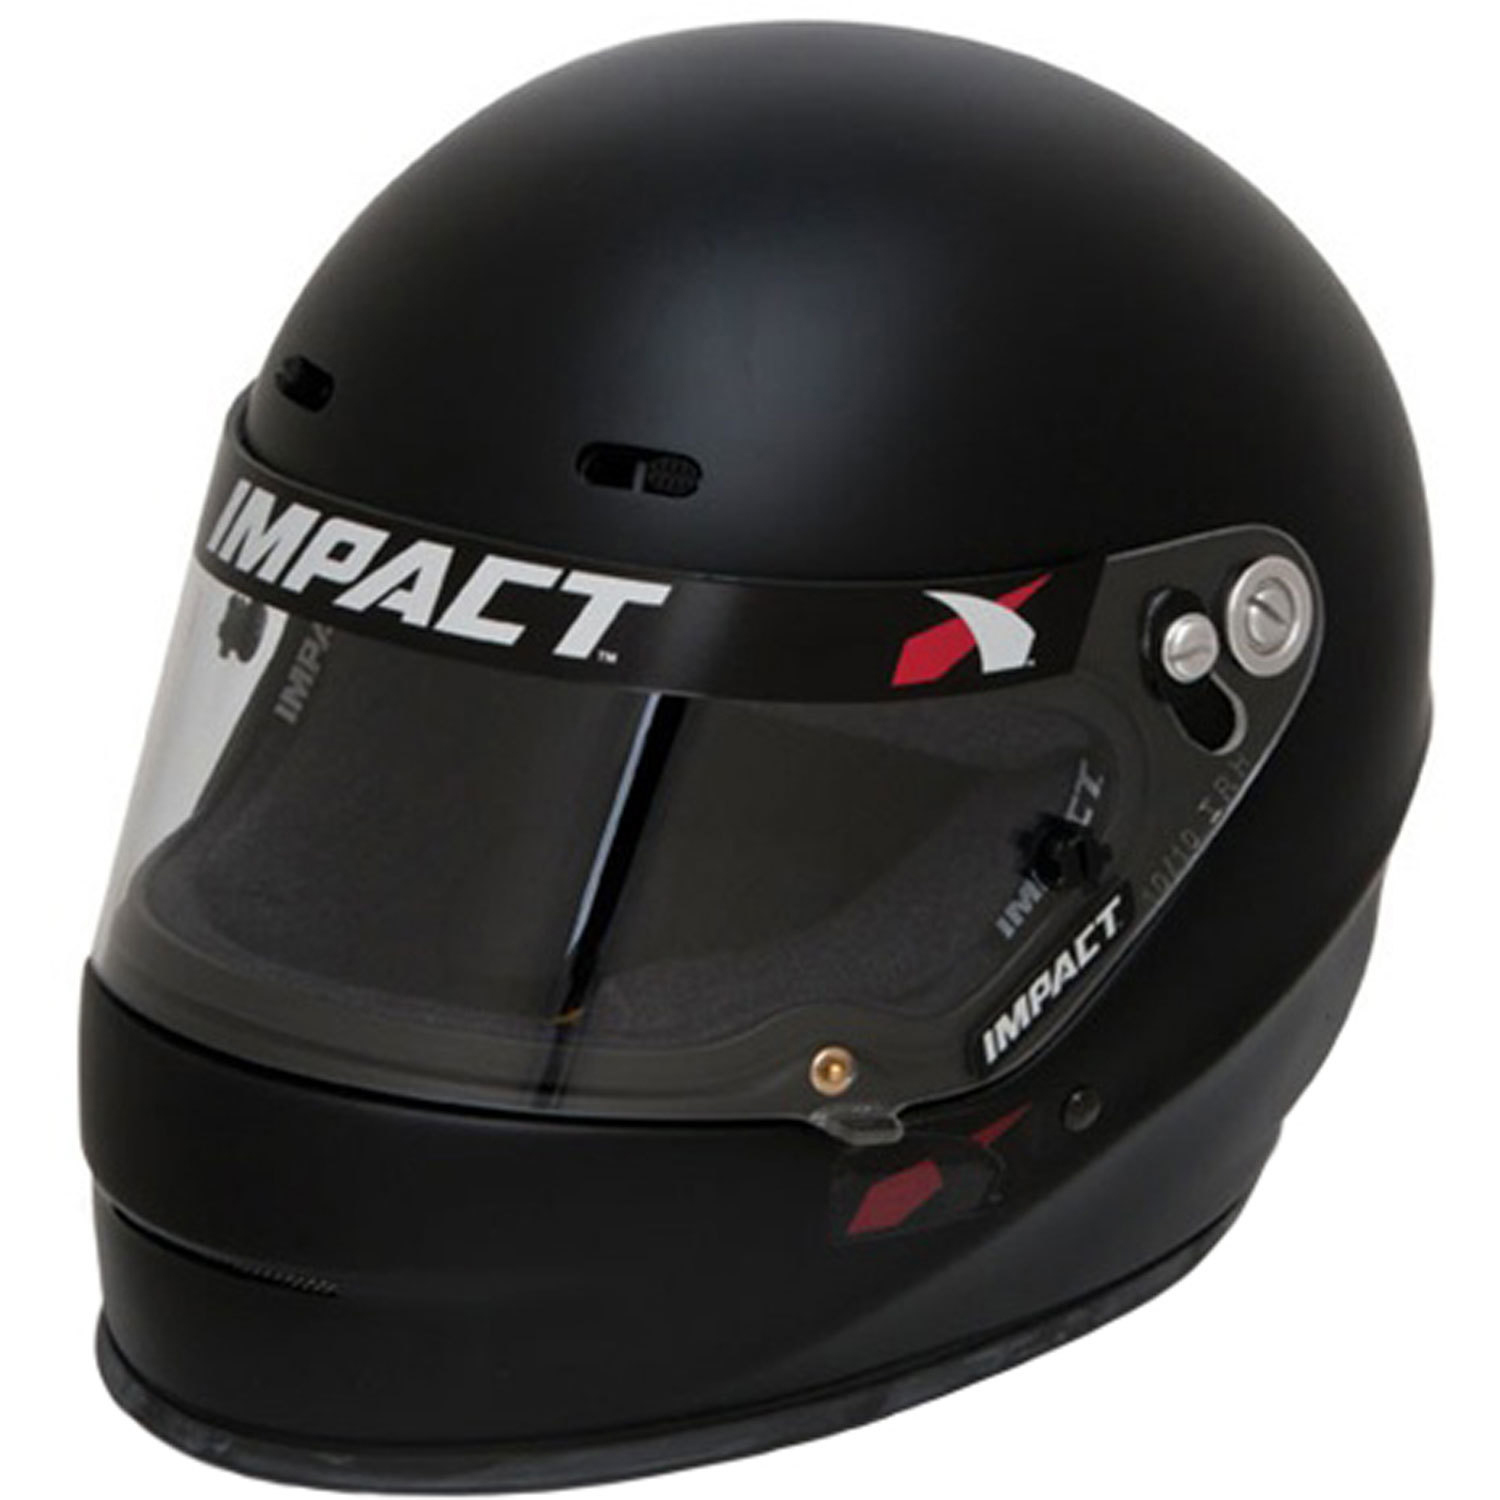 IMPACT RACING Helmet 1320 Full Face Snell SA2020 Head and Neck Support Ready Fla